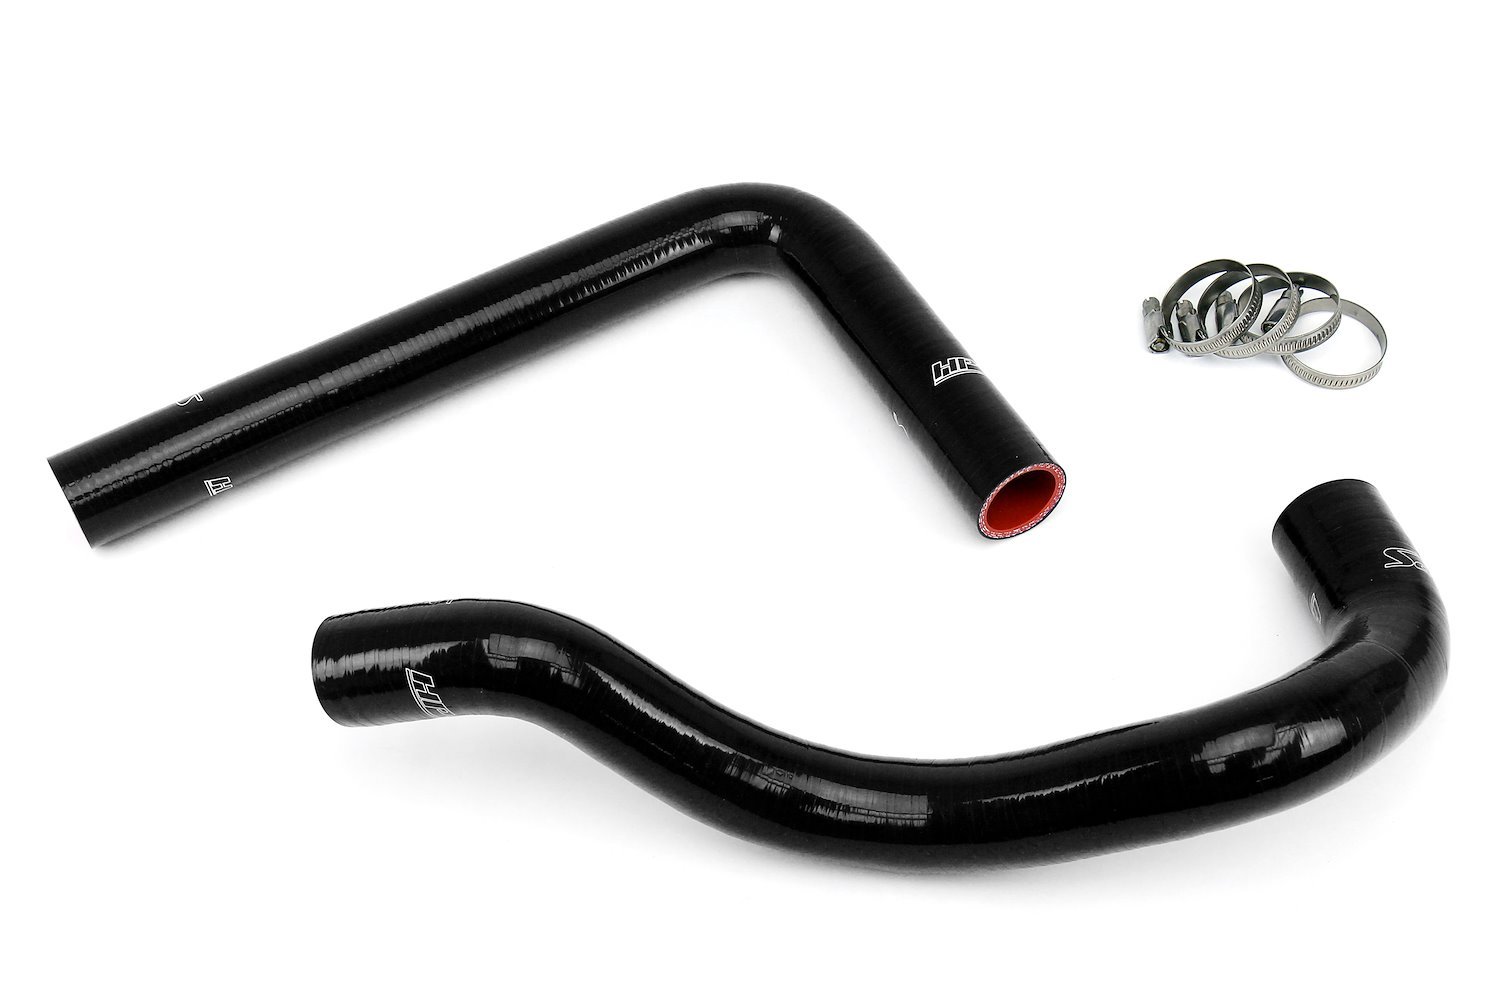 57-1924-BLK Radiator Hose Kit, 3-Ply Reinforced Silicone, Replaces Rubber Radiator Coolant Hoses